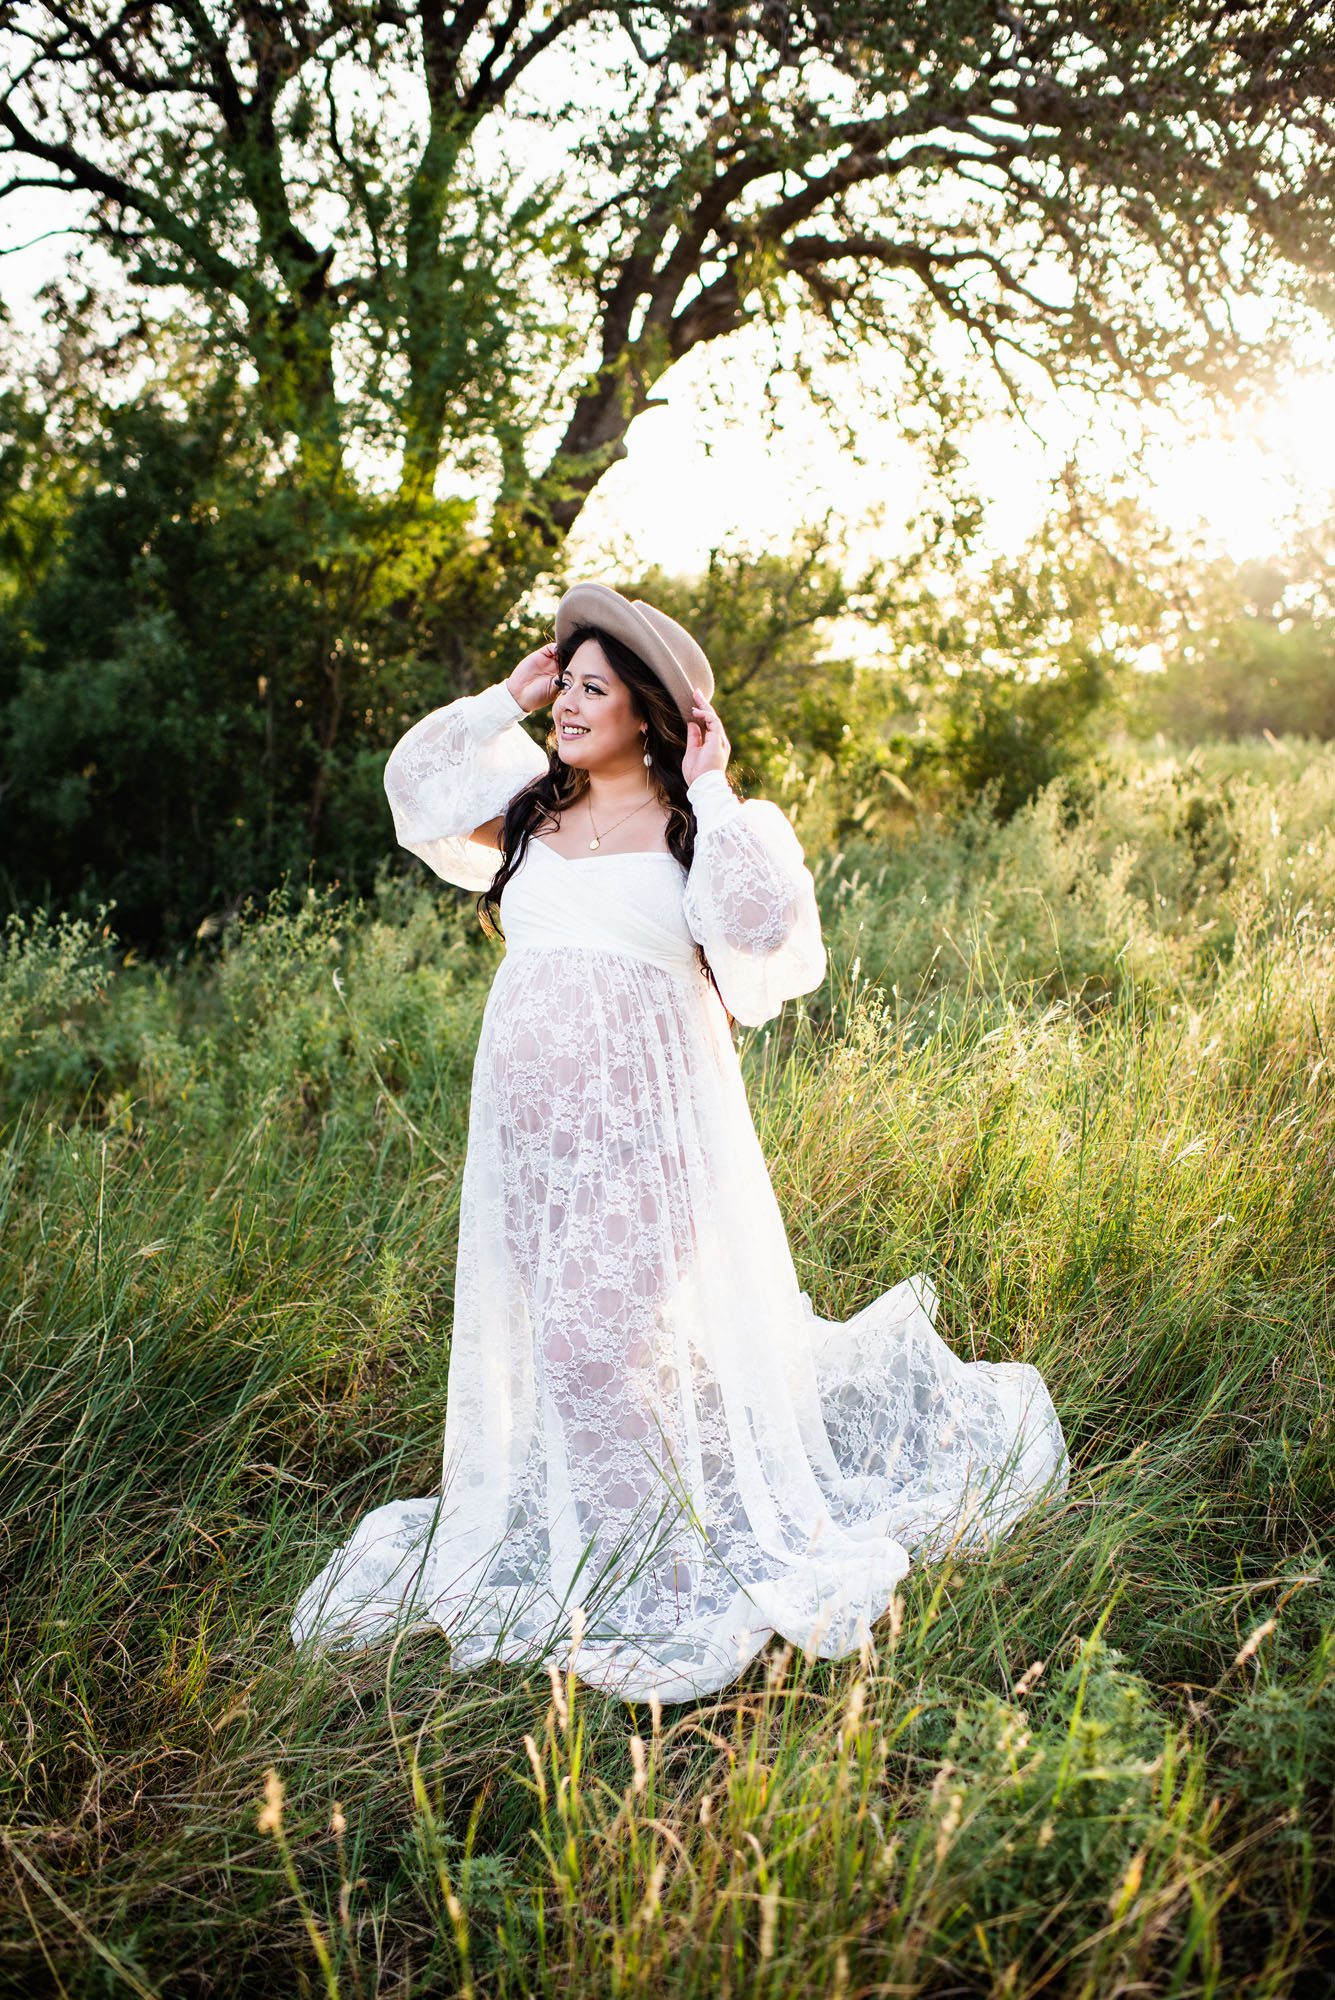 Expectant mother smiling in field in long white lace dress, Best San Antonio maternity photographer